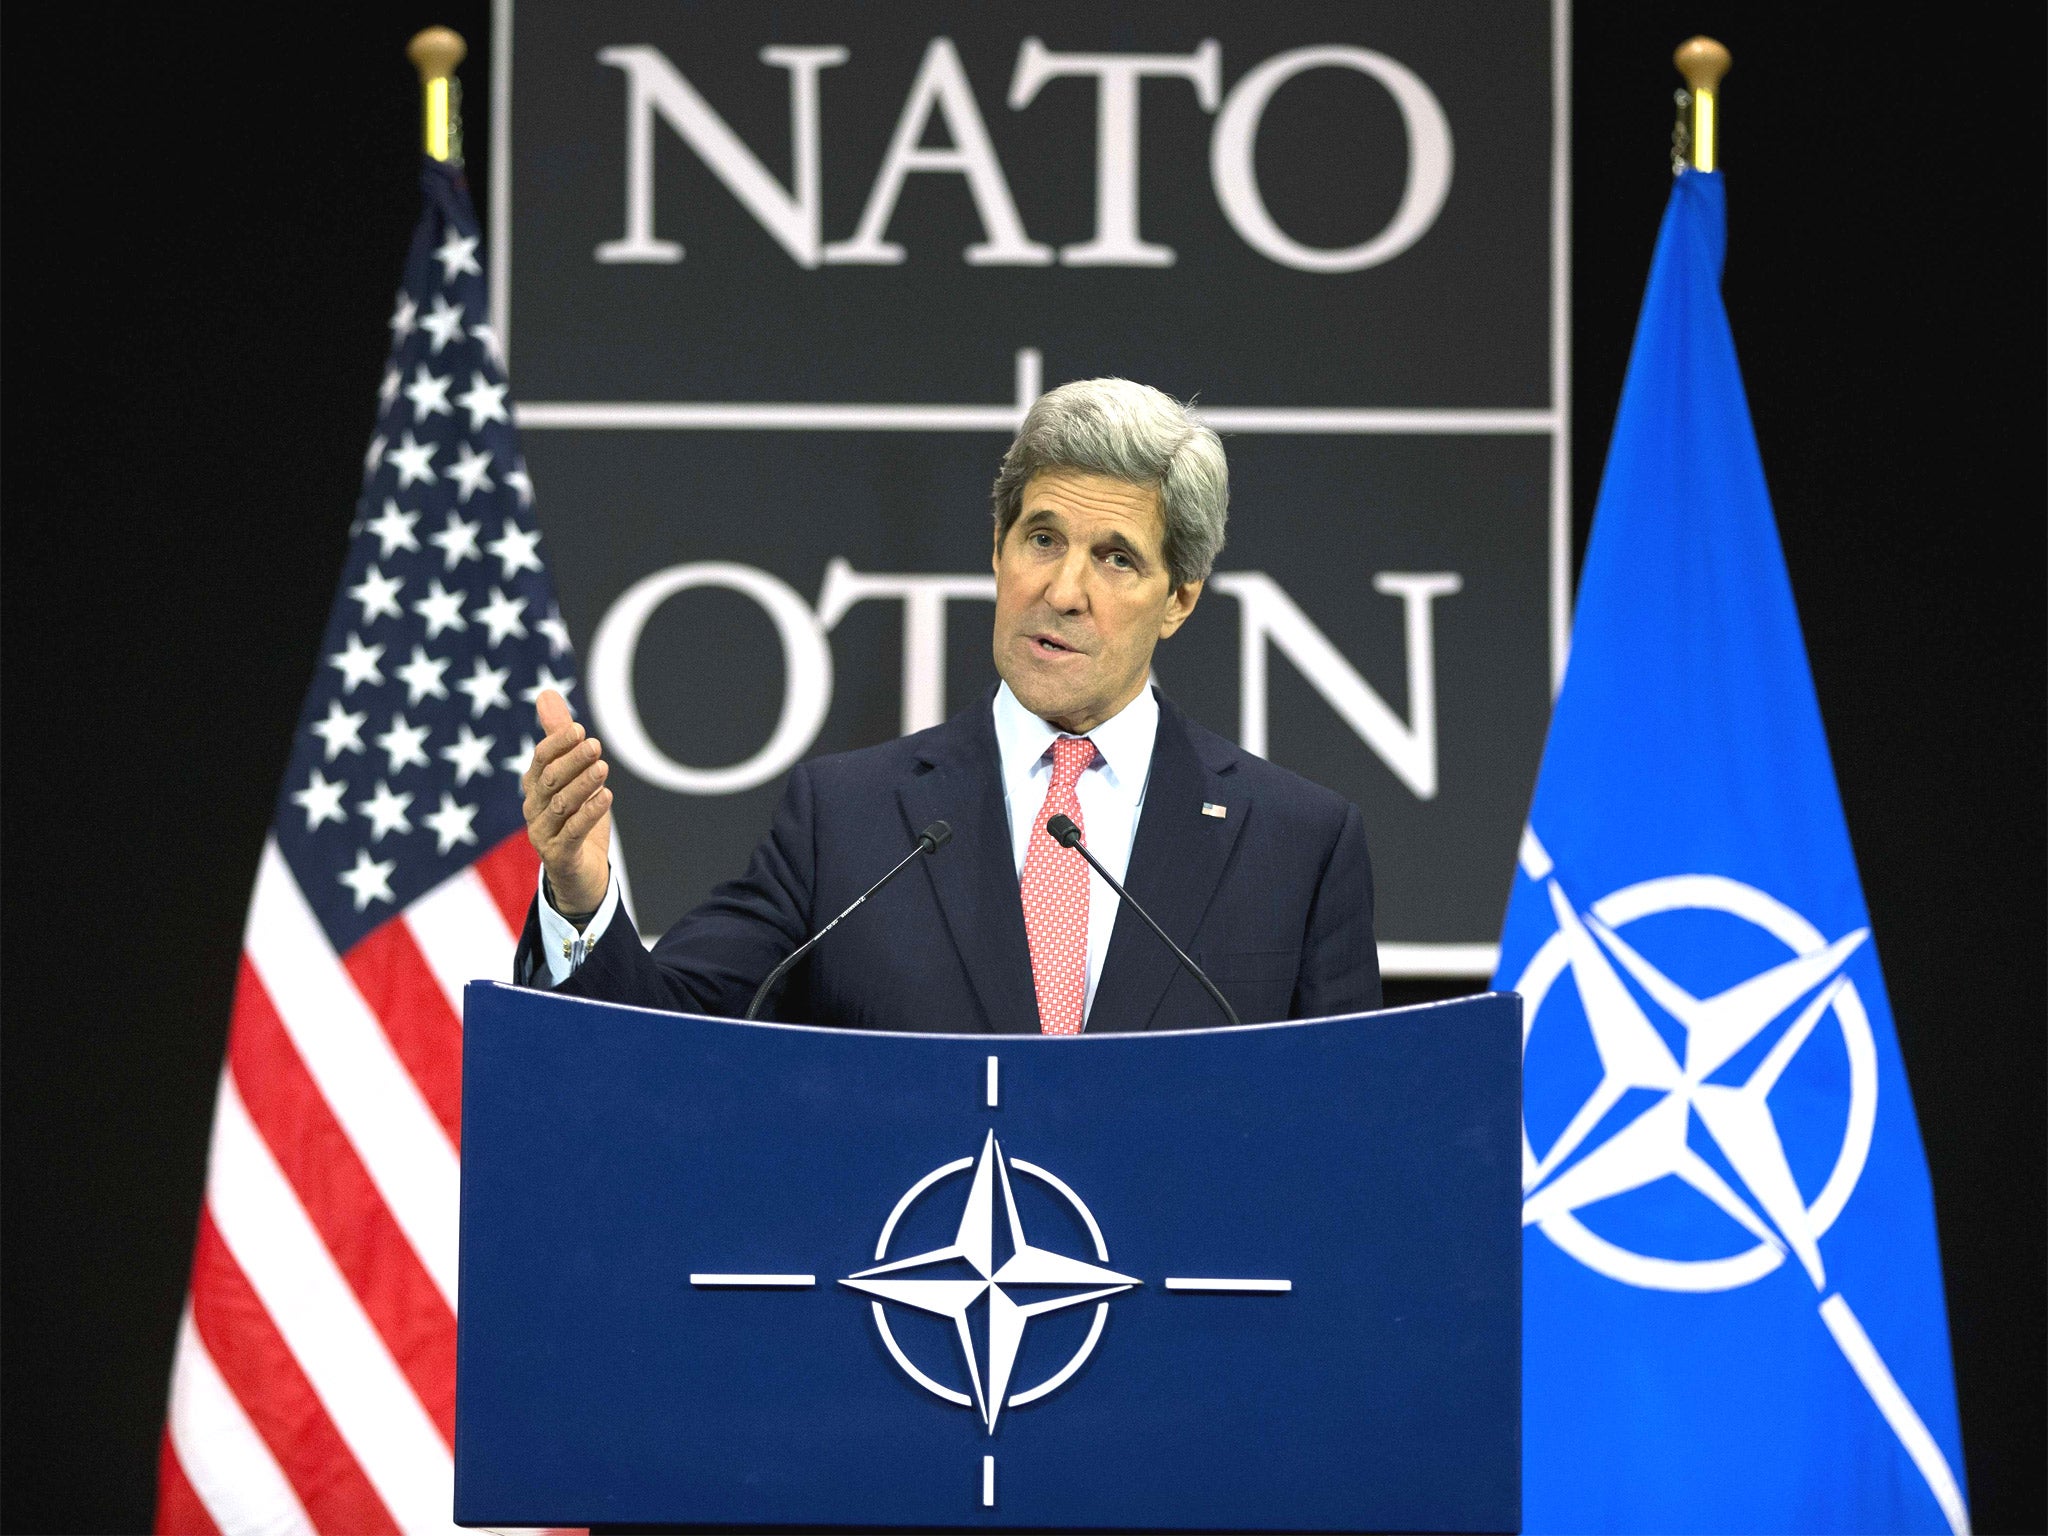 US Secretary of State John Kerry during the NATO news conference